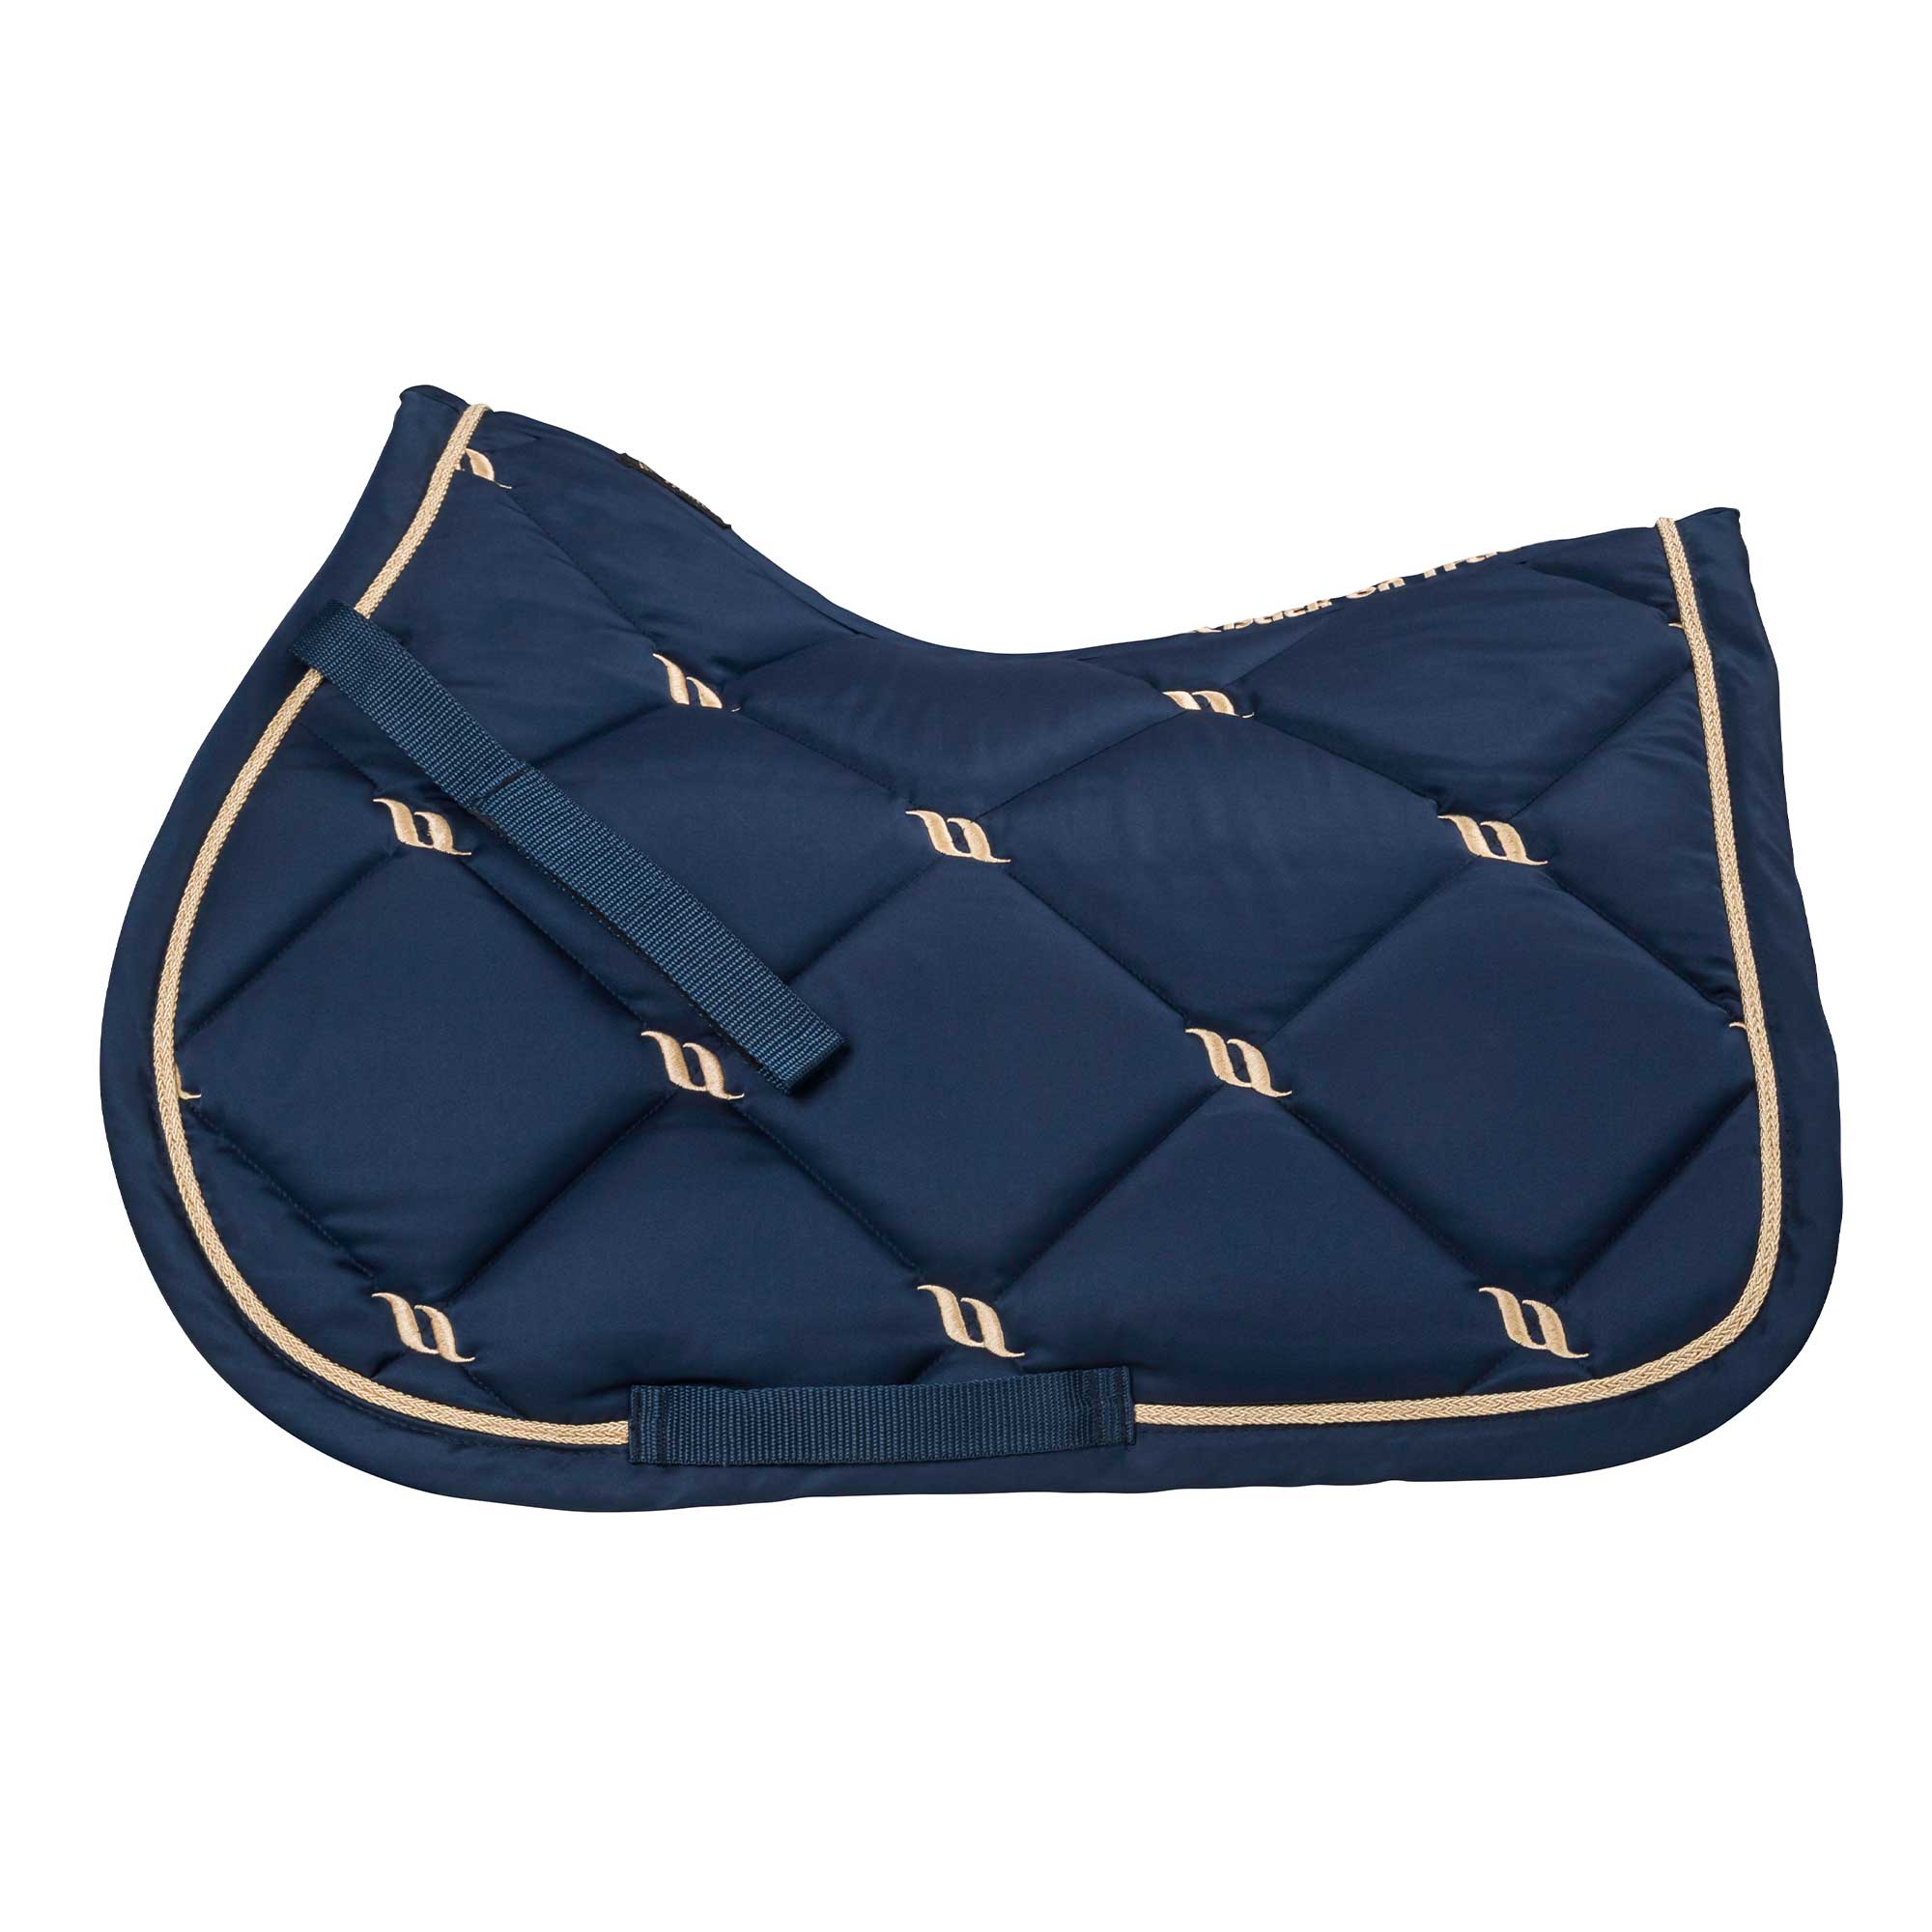 "Nights Collection" Saddle Pad Jumping Noble Blue